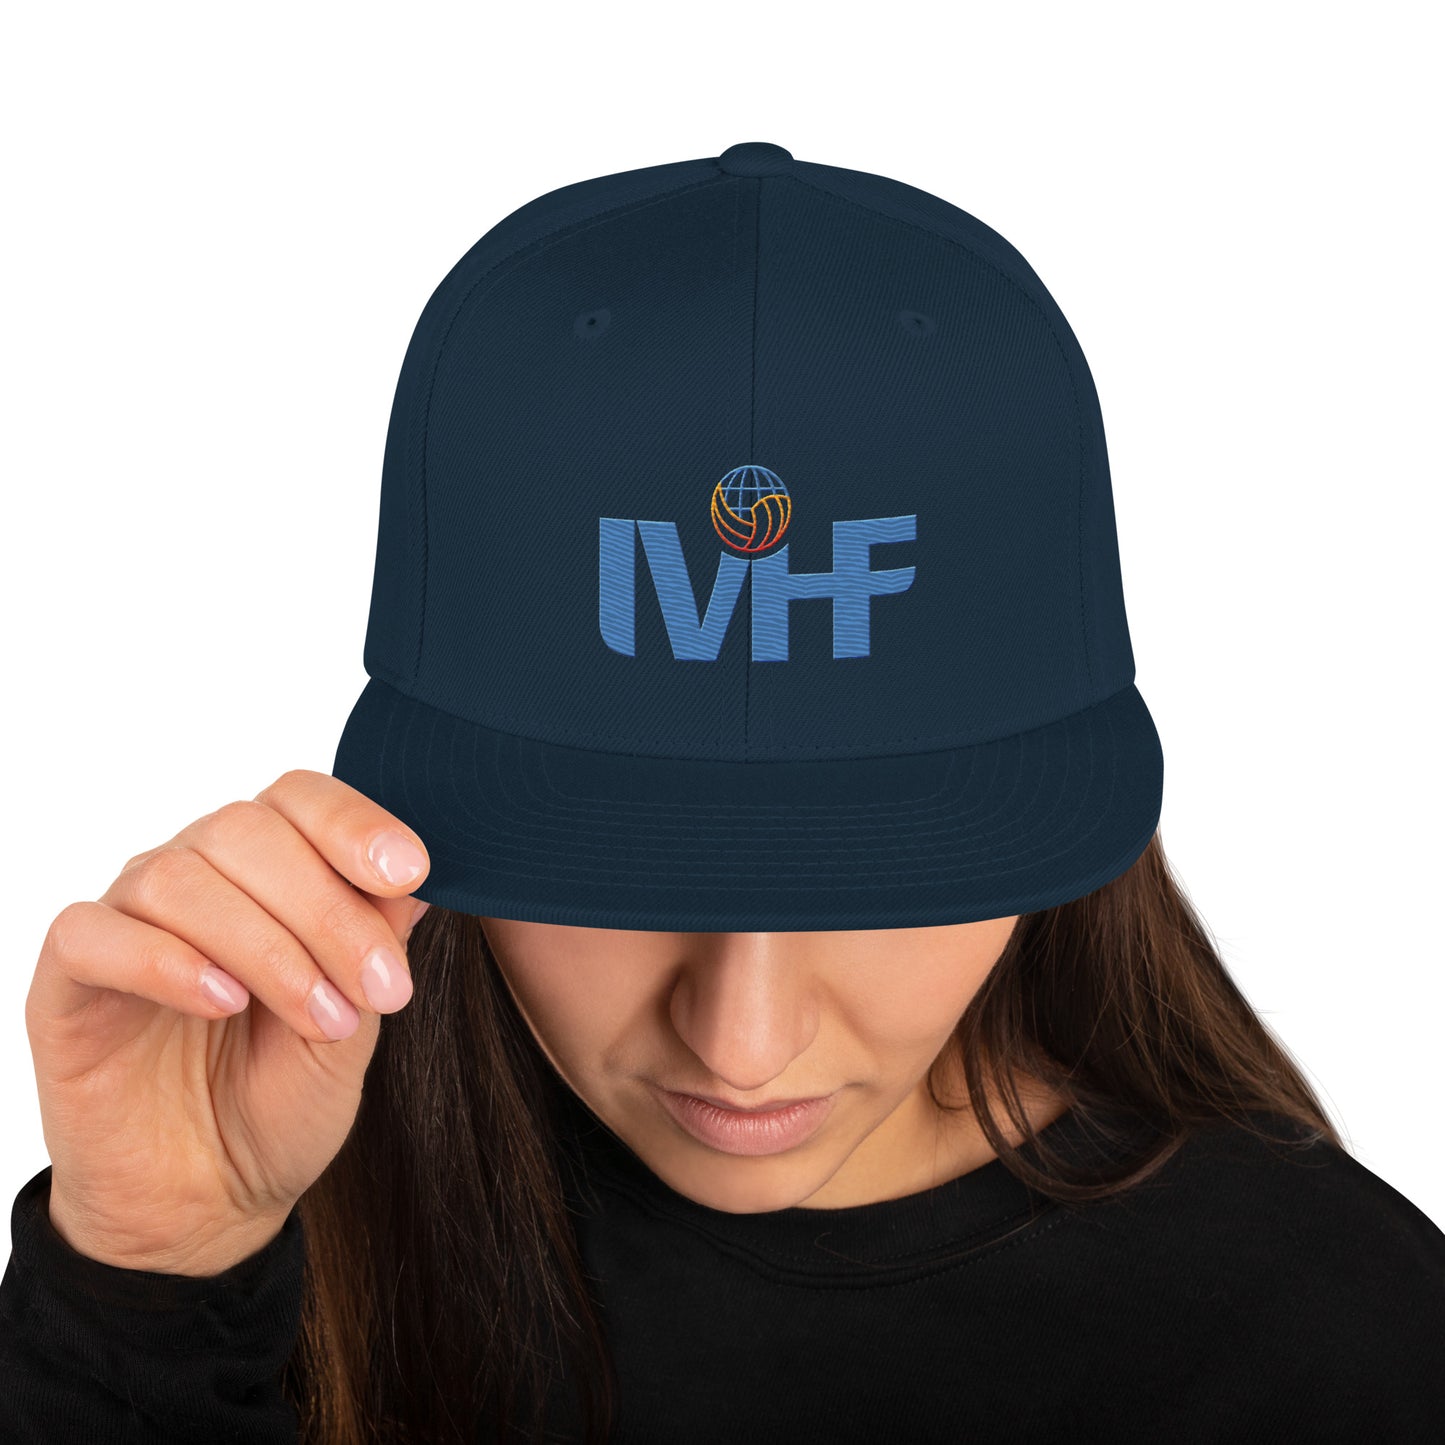 IVHF Snapback Embroidered Cap